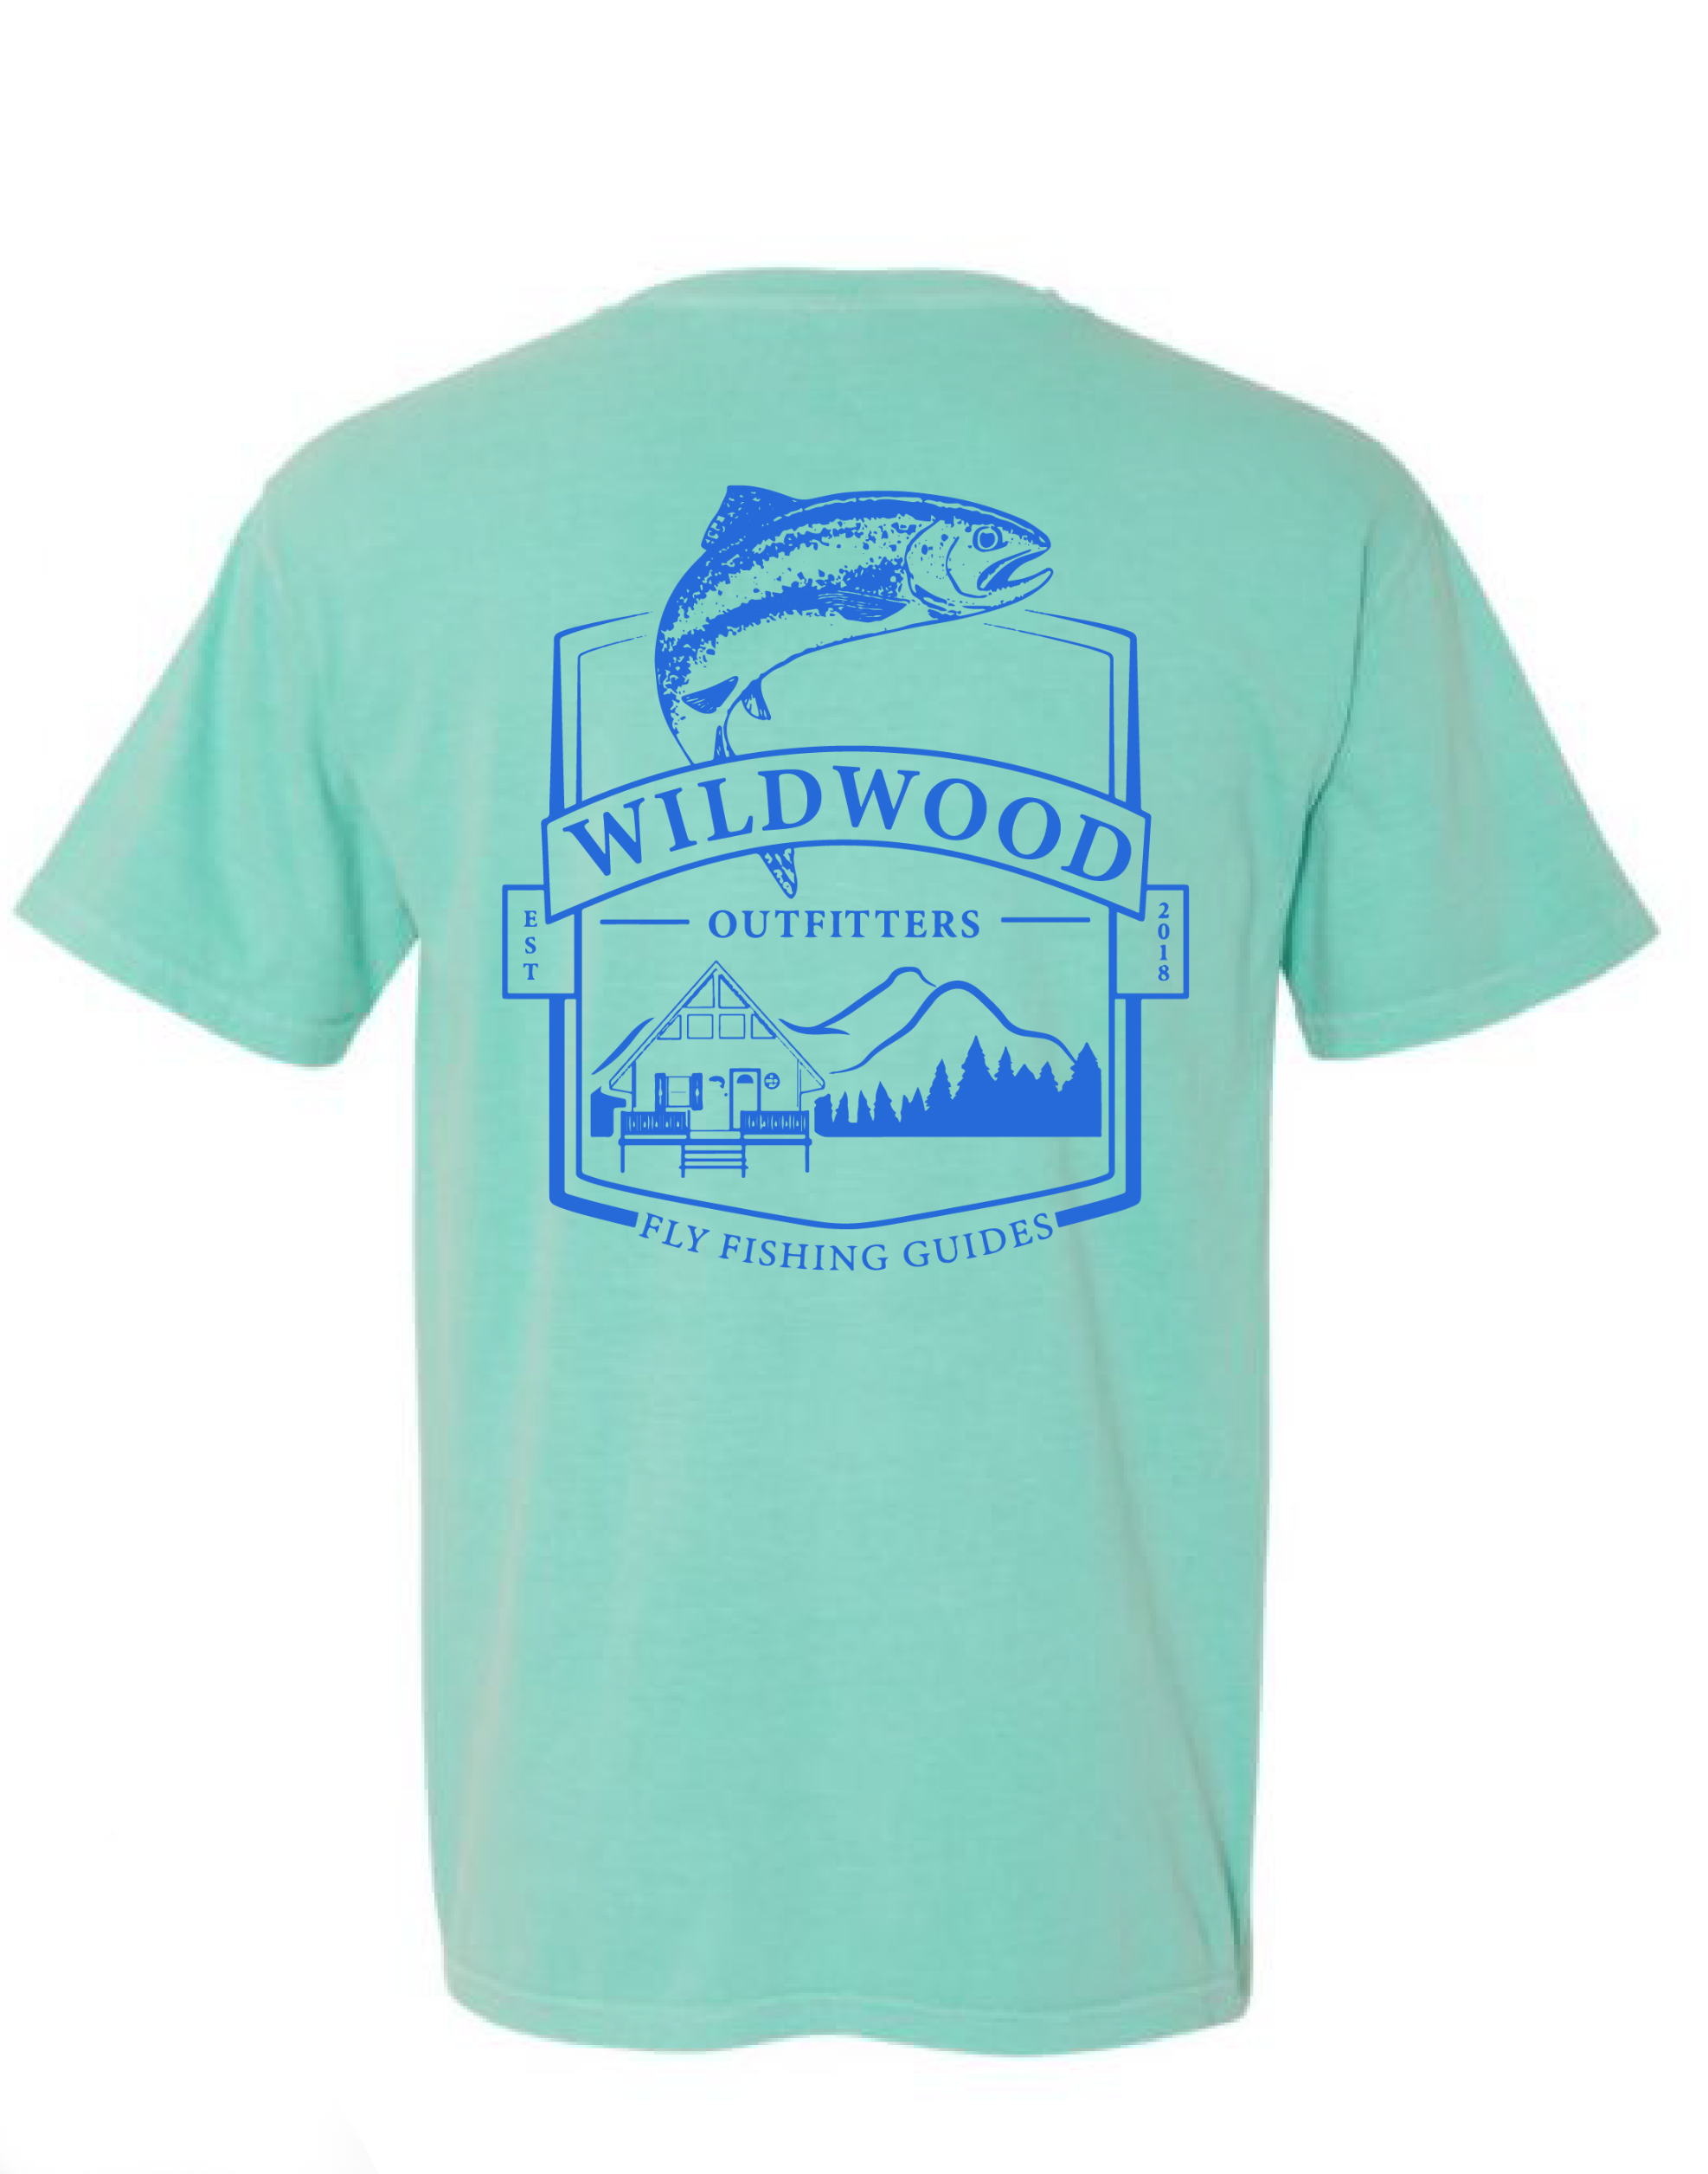 Short Sleeve Wildwood Outfitters Shirts-Mint